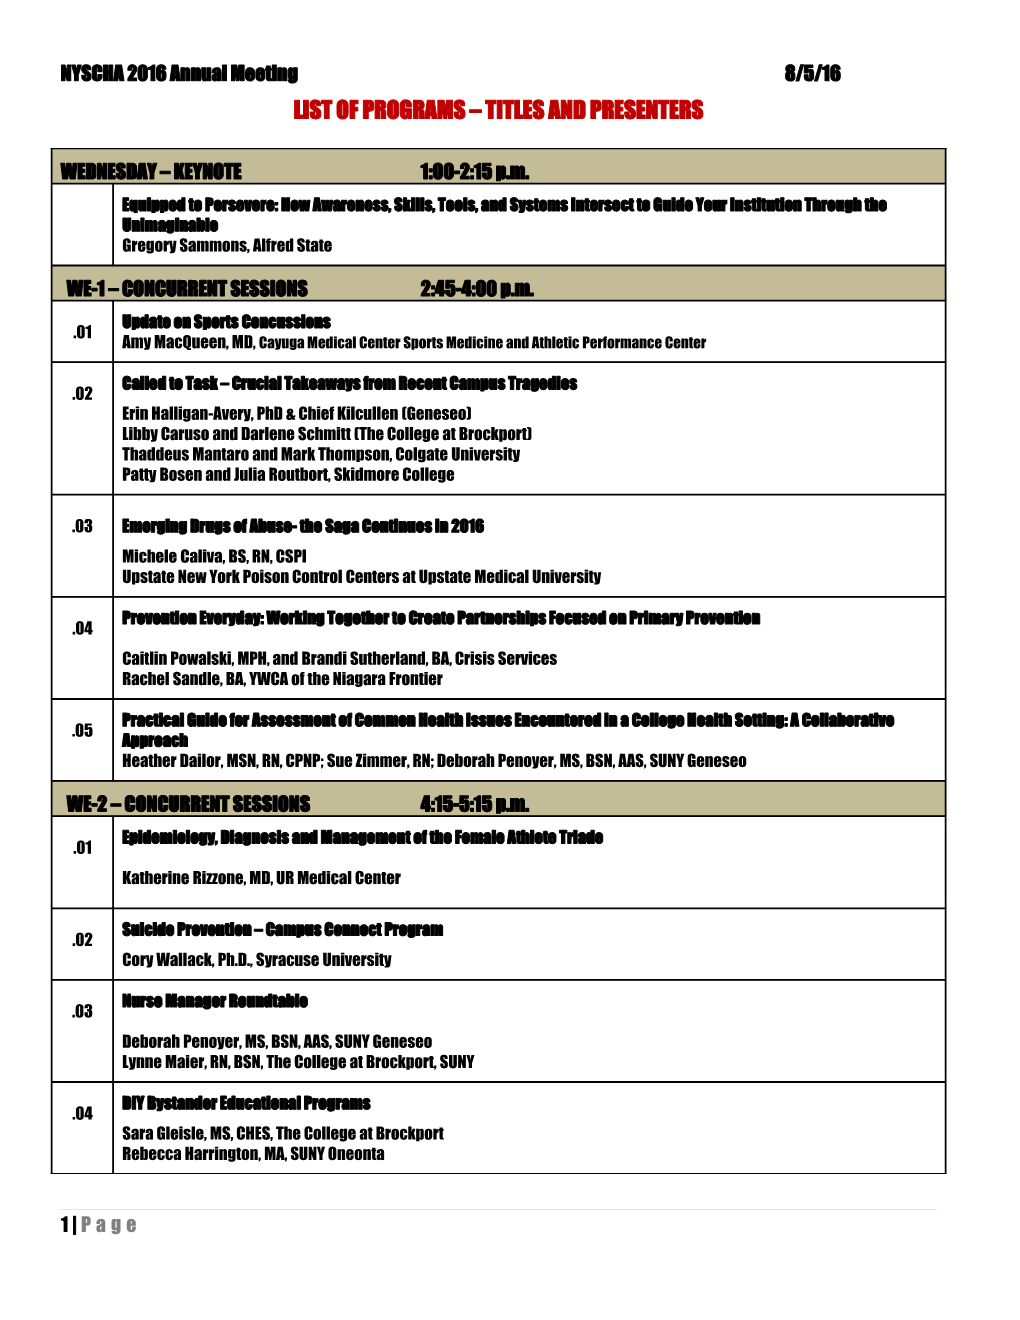 List of Programs Titles and Presenters